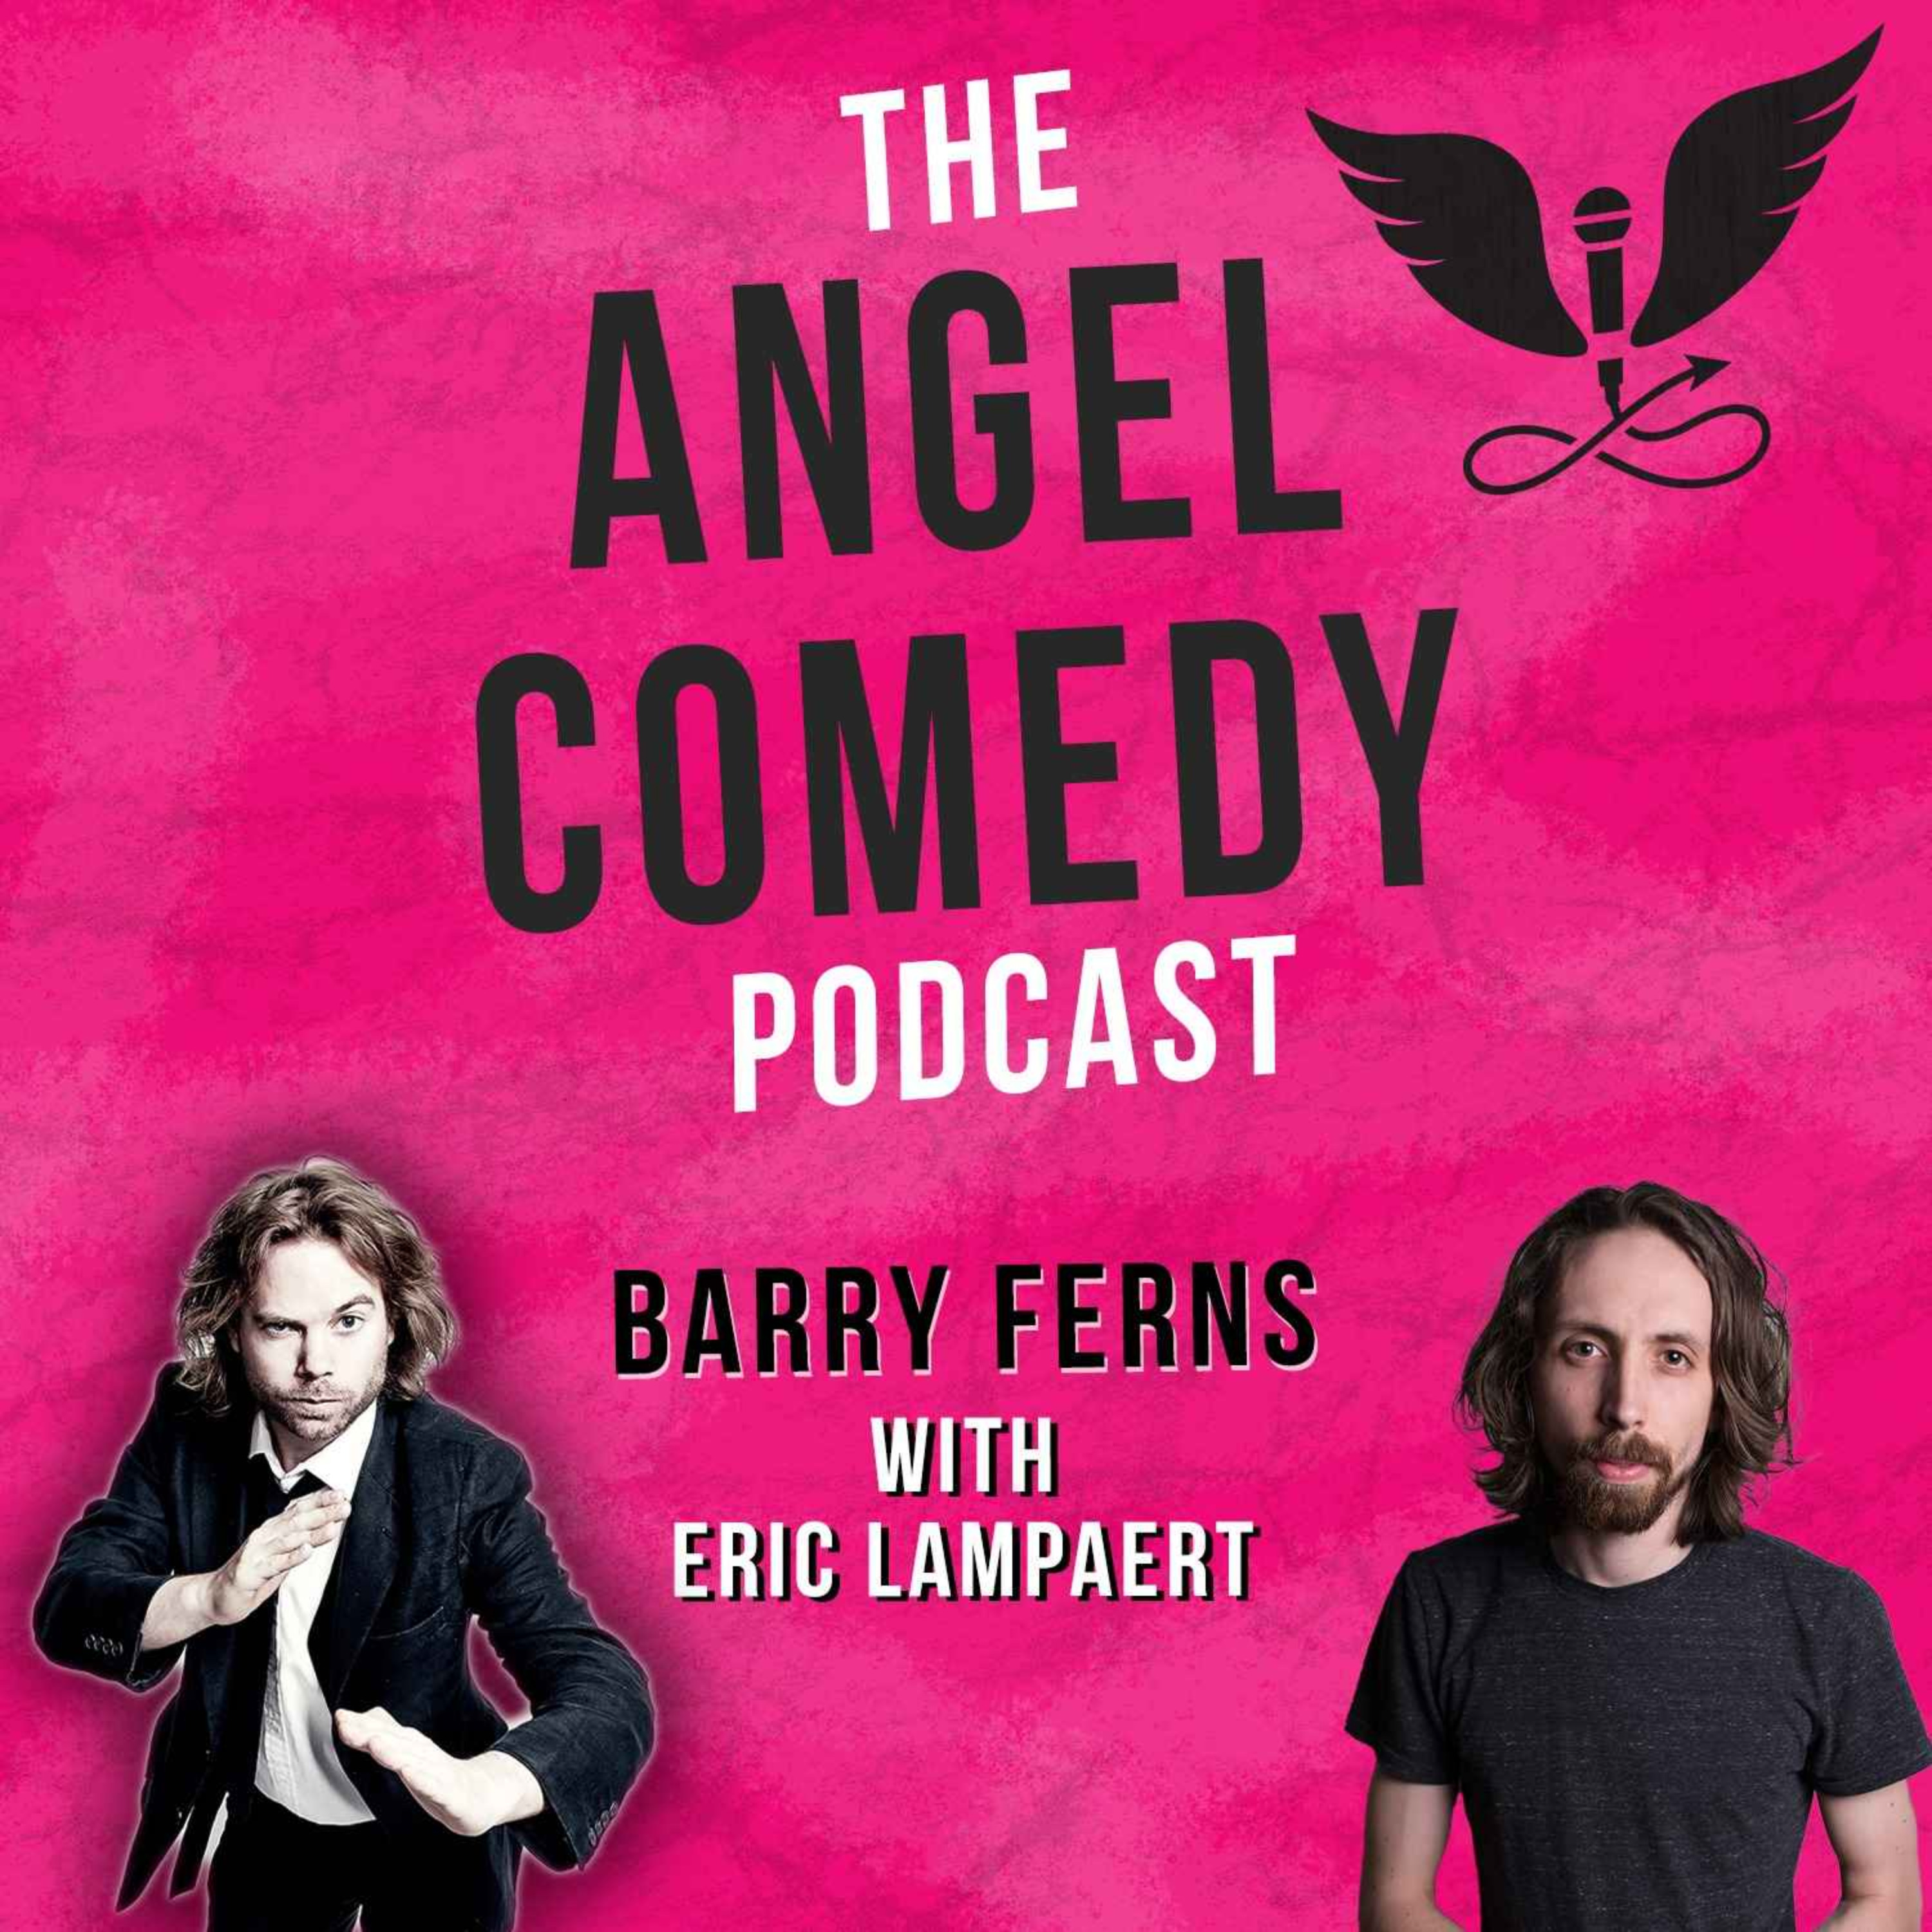 Podcast: The Angel Comedy Podcast with Eric Lampaert - Angel Comedy